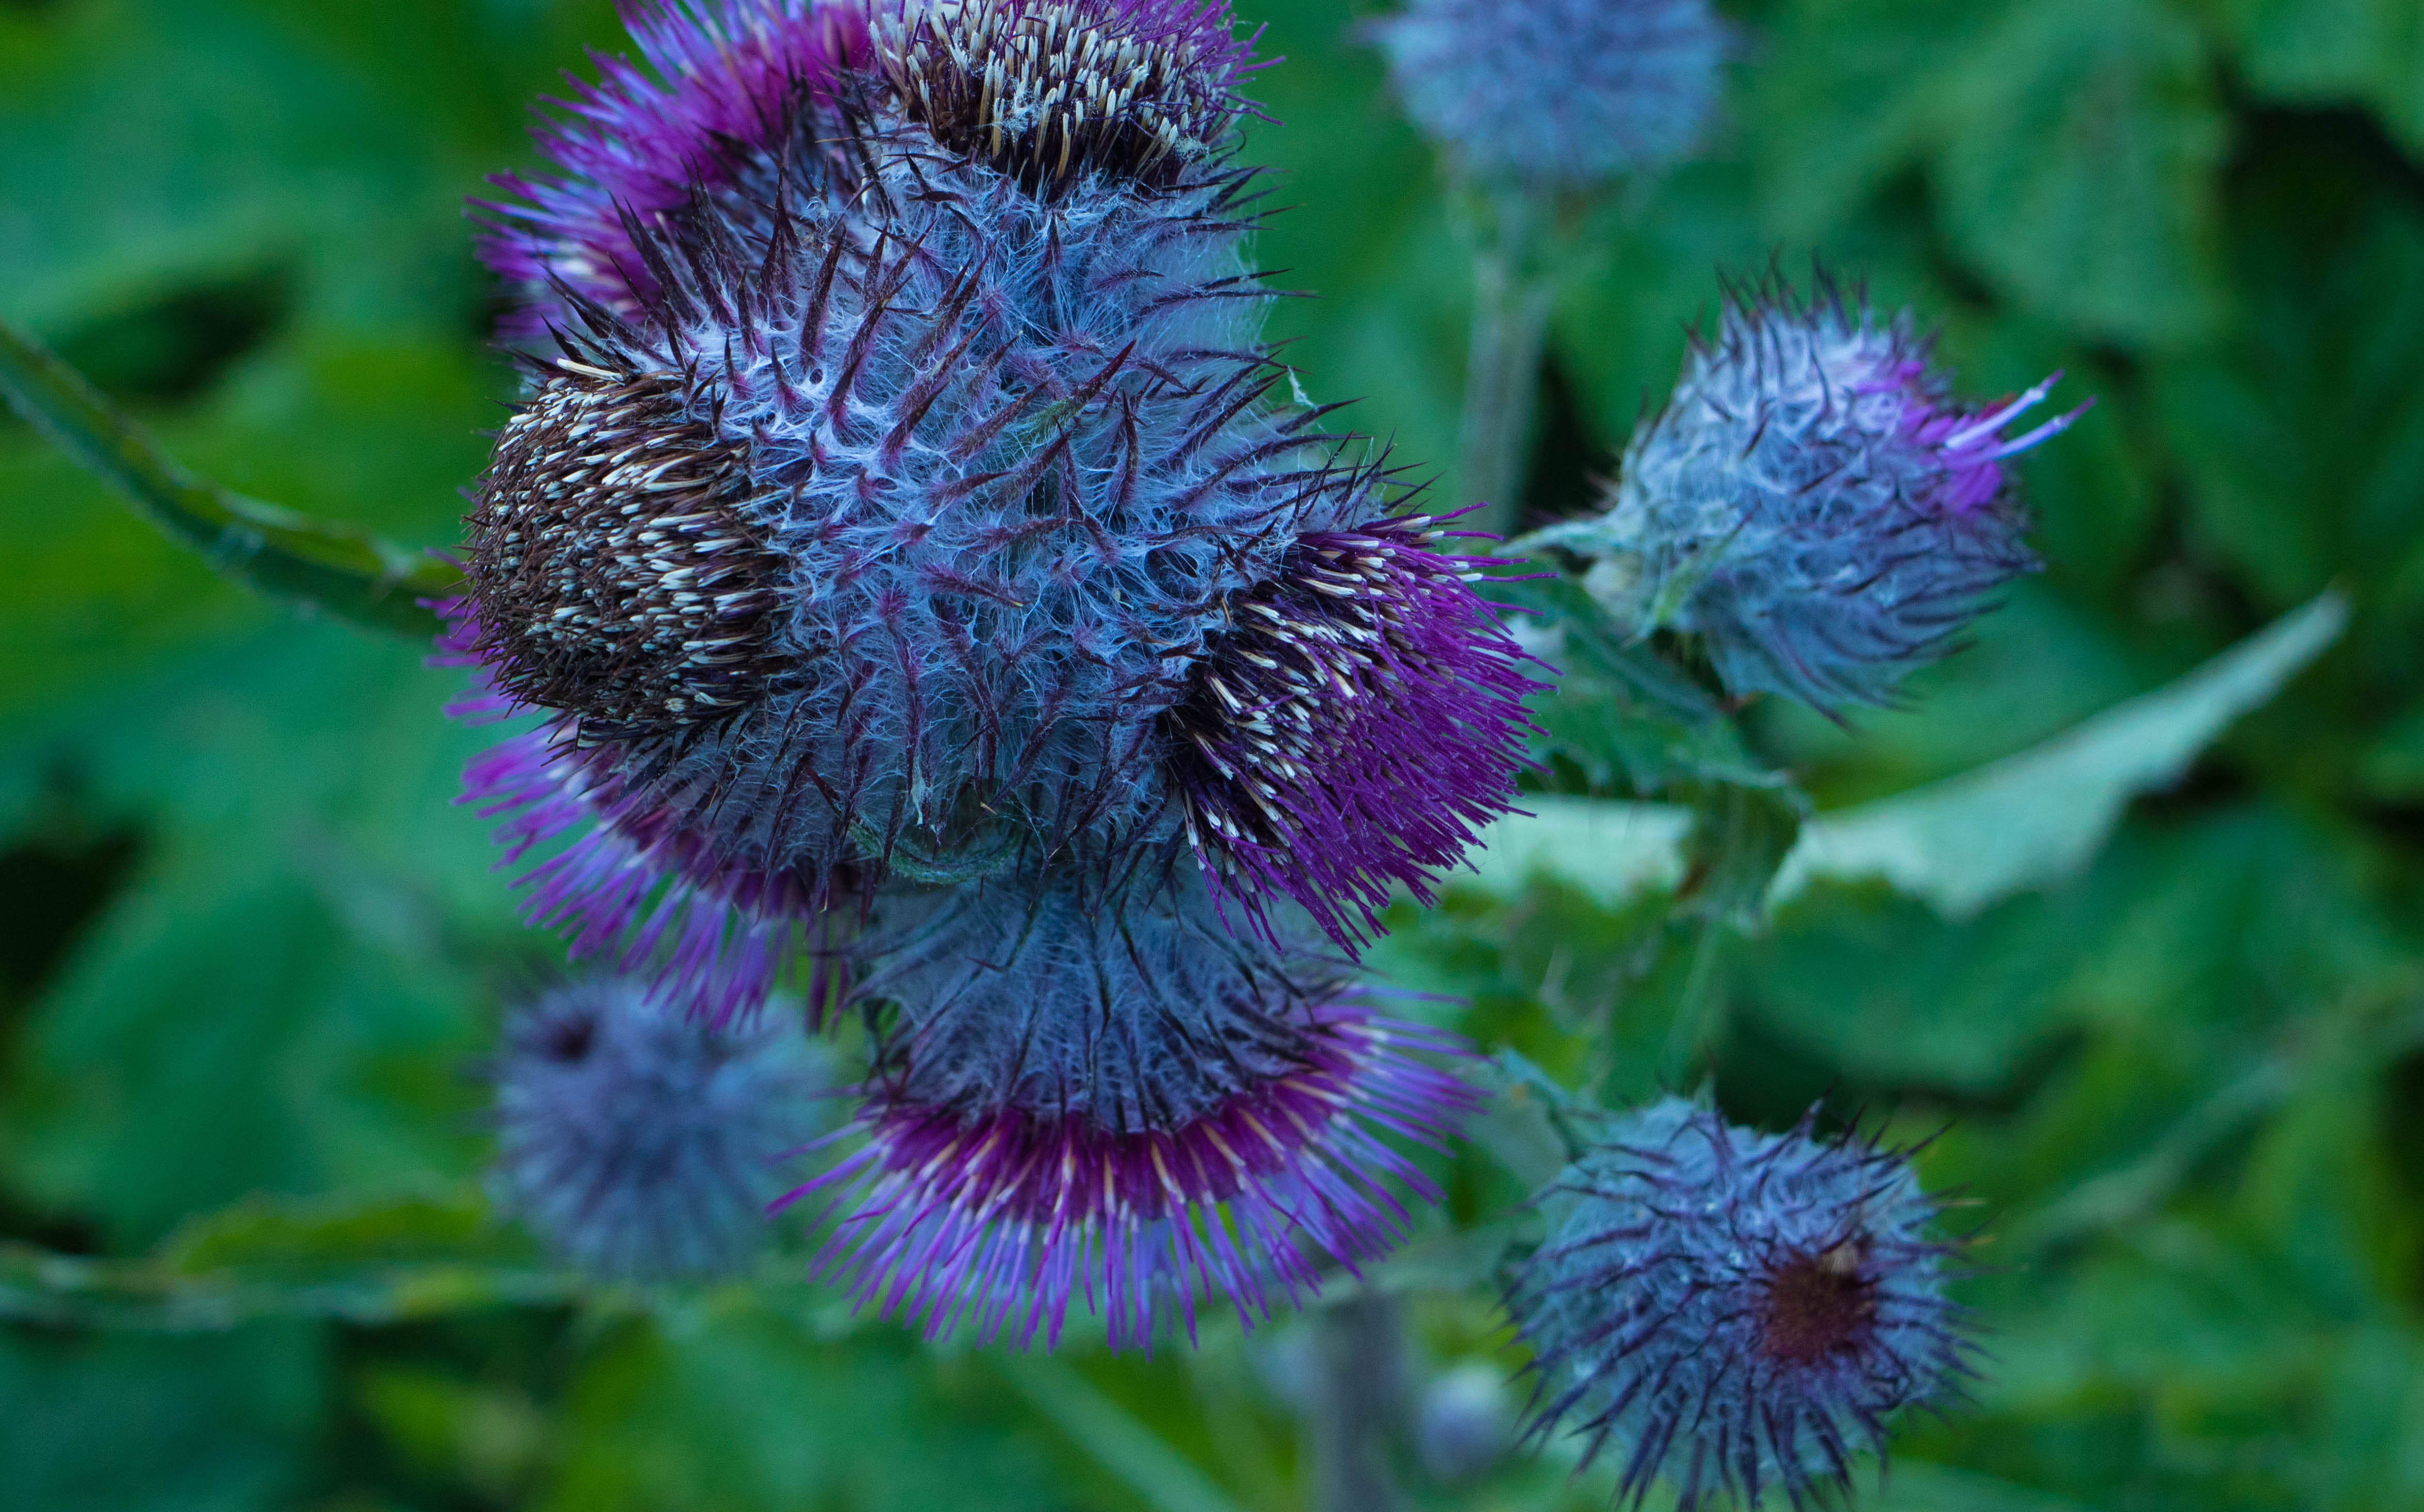 Wildflowers abound in the summer, like this crazy alien thistle.